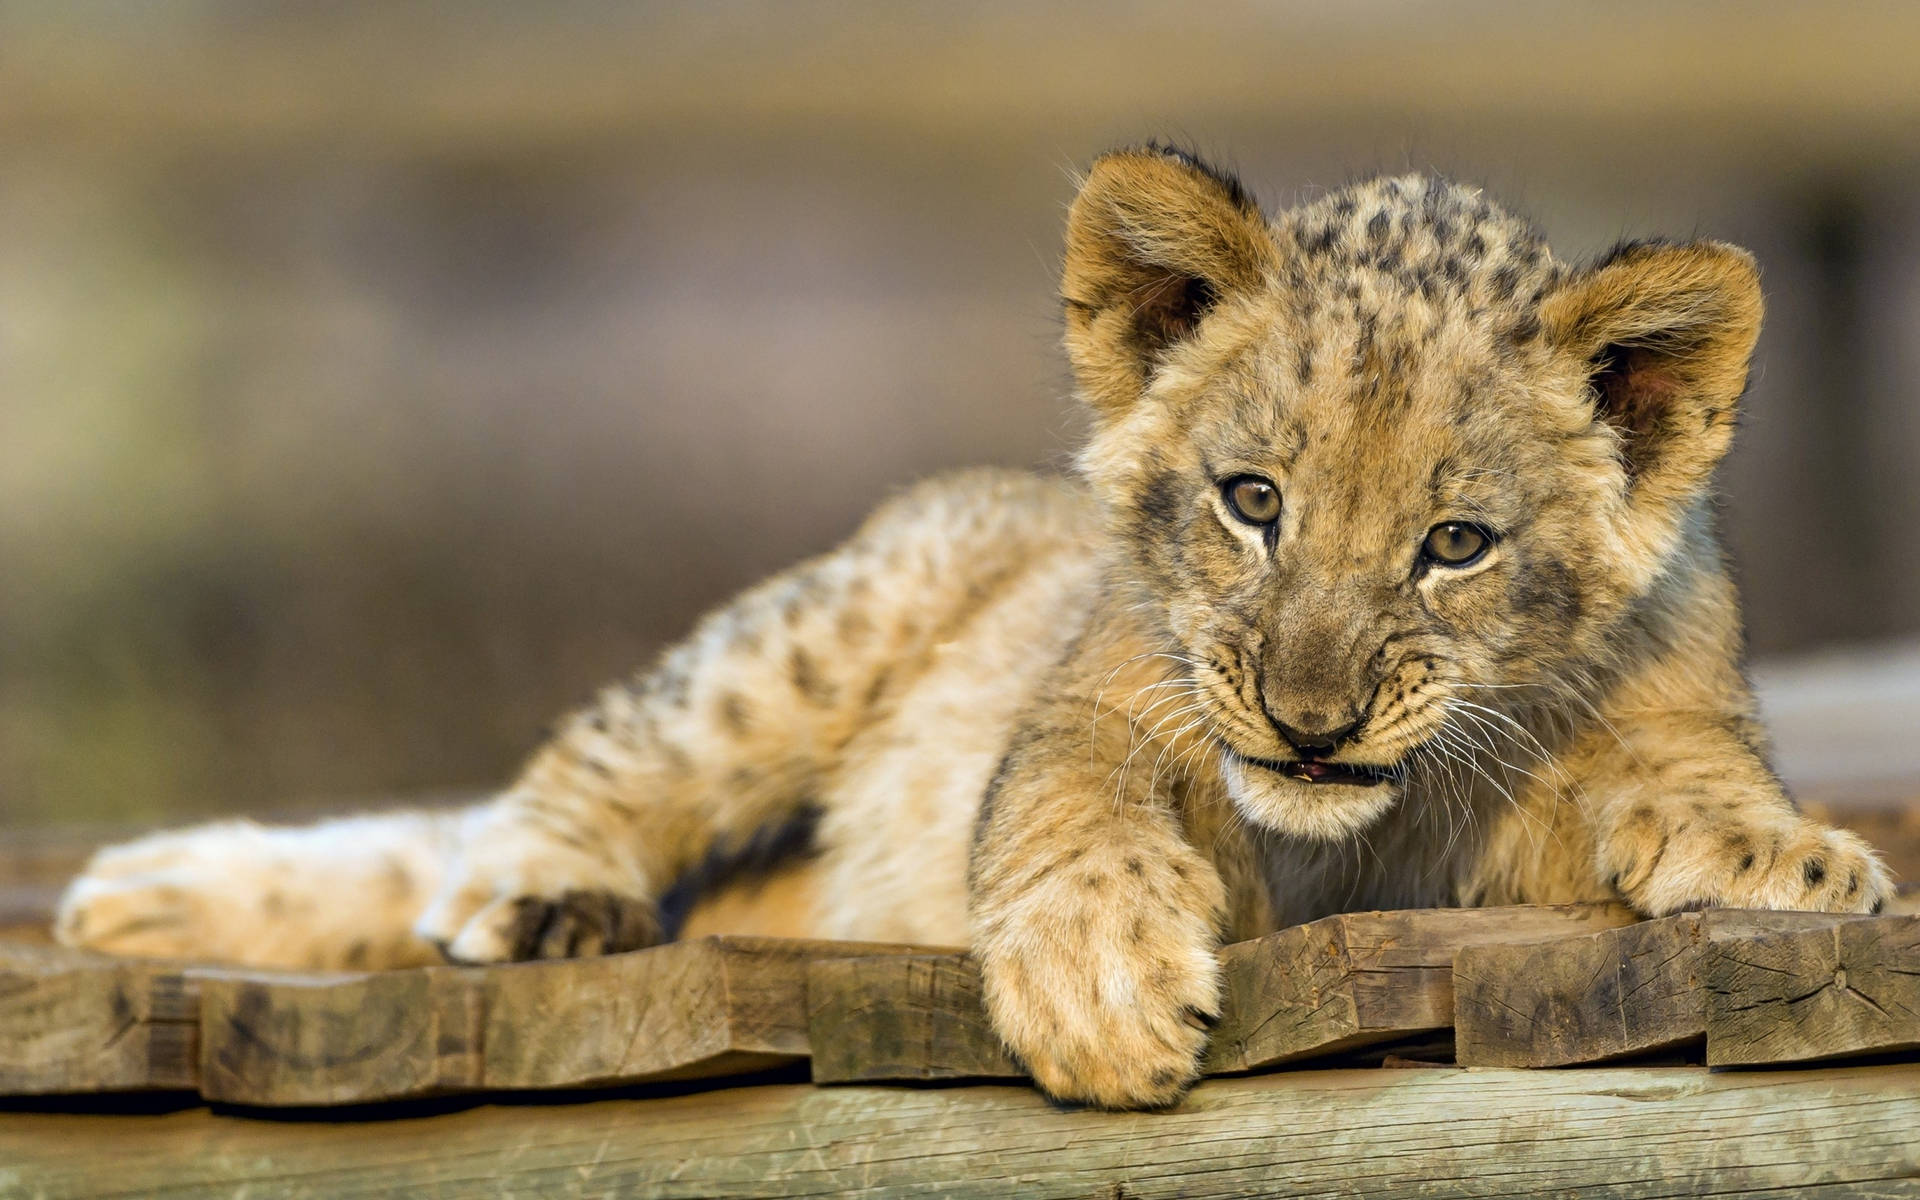 Lion Cub On Wooden Planks Background